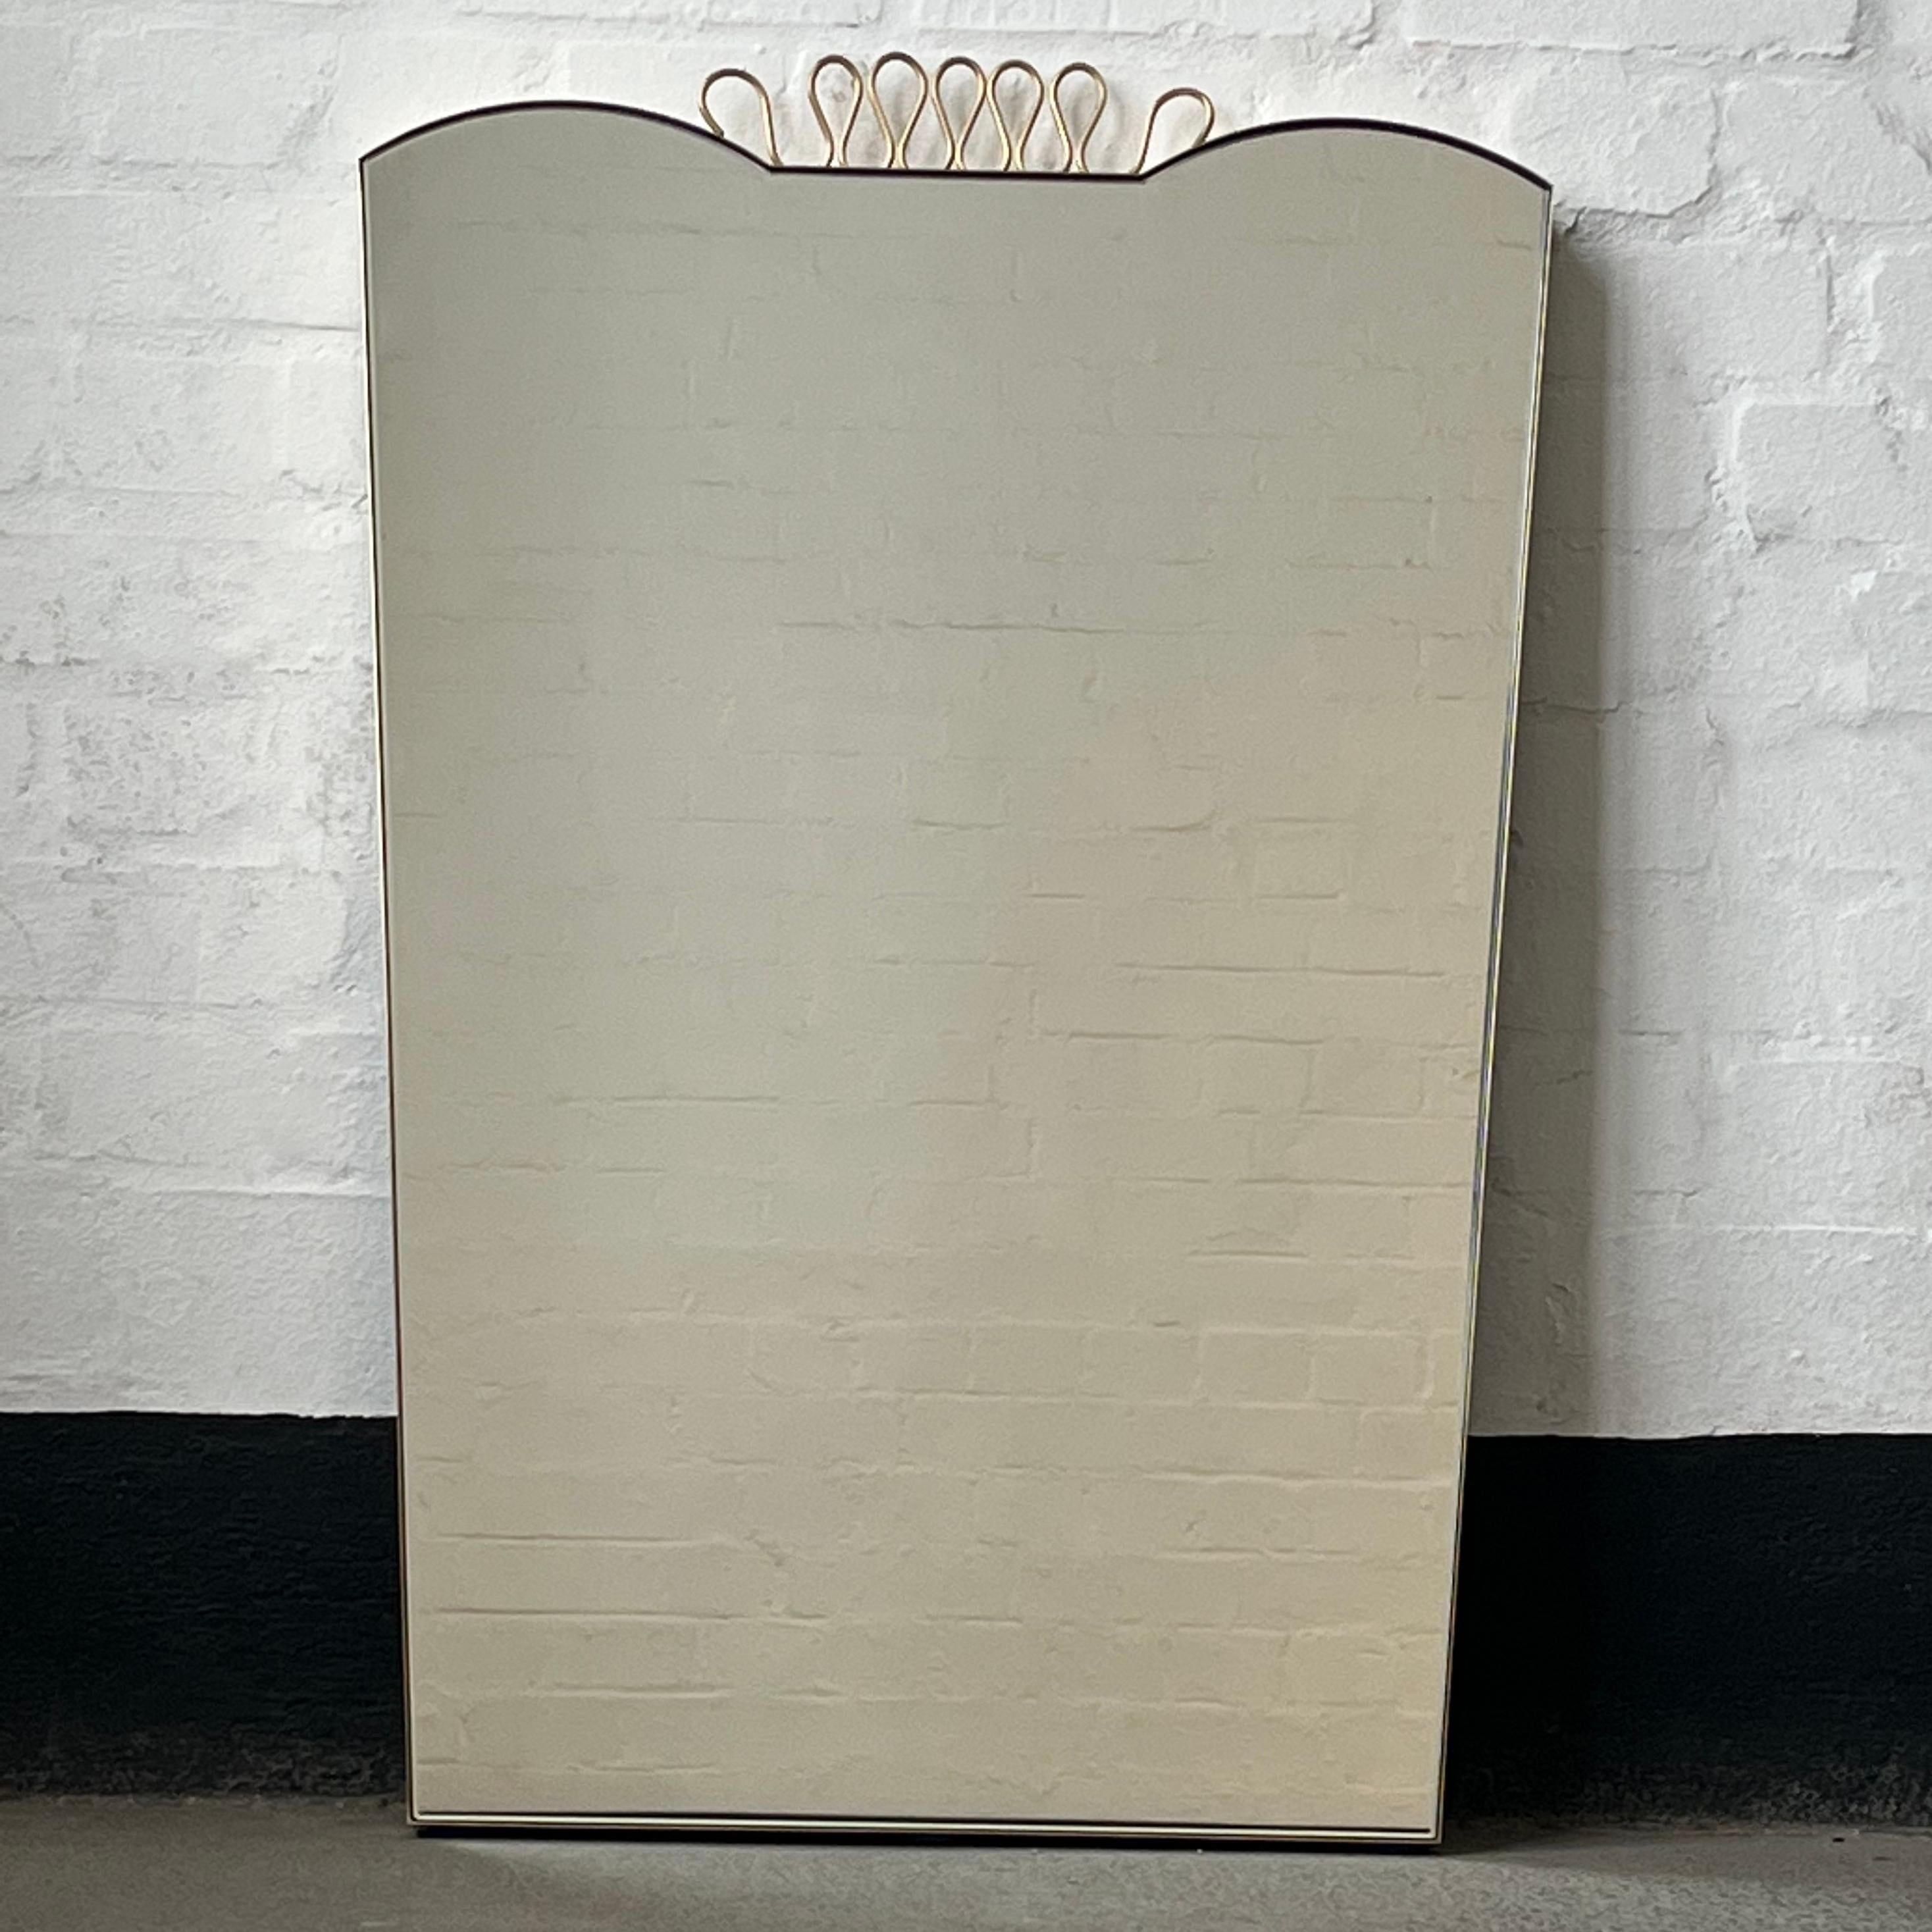 Exquisite mirror with a minimalist brass frame and curly decorative detail inspired by the celebrated work of Italian designer Gio Ponti. Hand-crafted in London, UK, to very high quality standards using pure solid brass.

Mirror dimensions: H 88.3cm